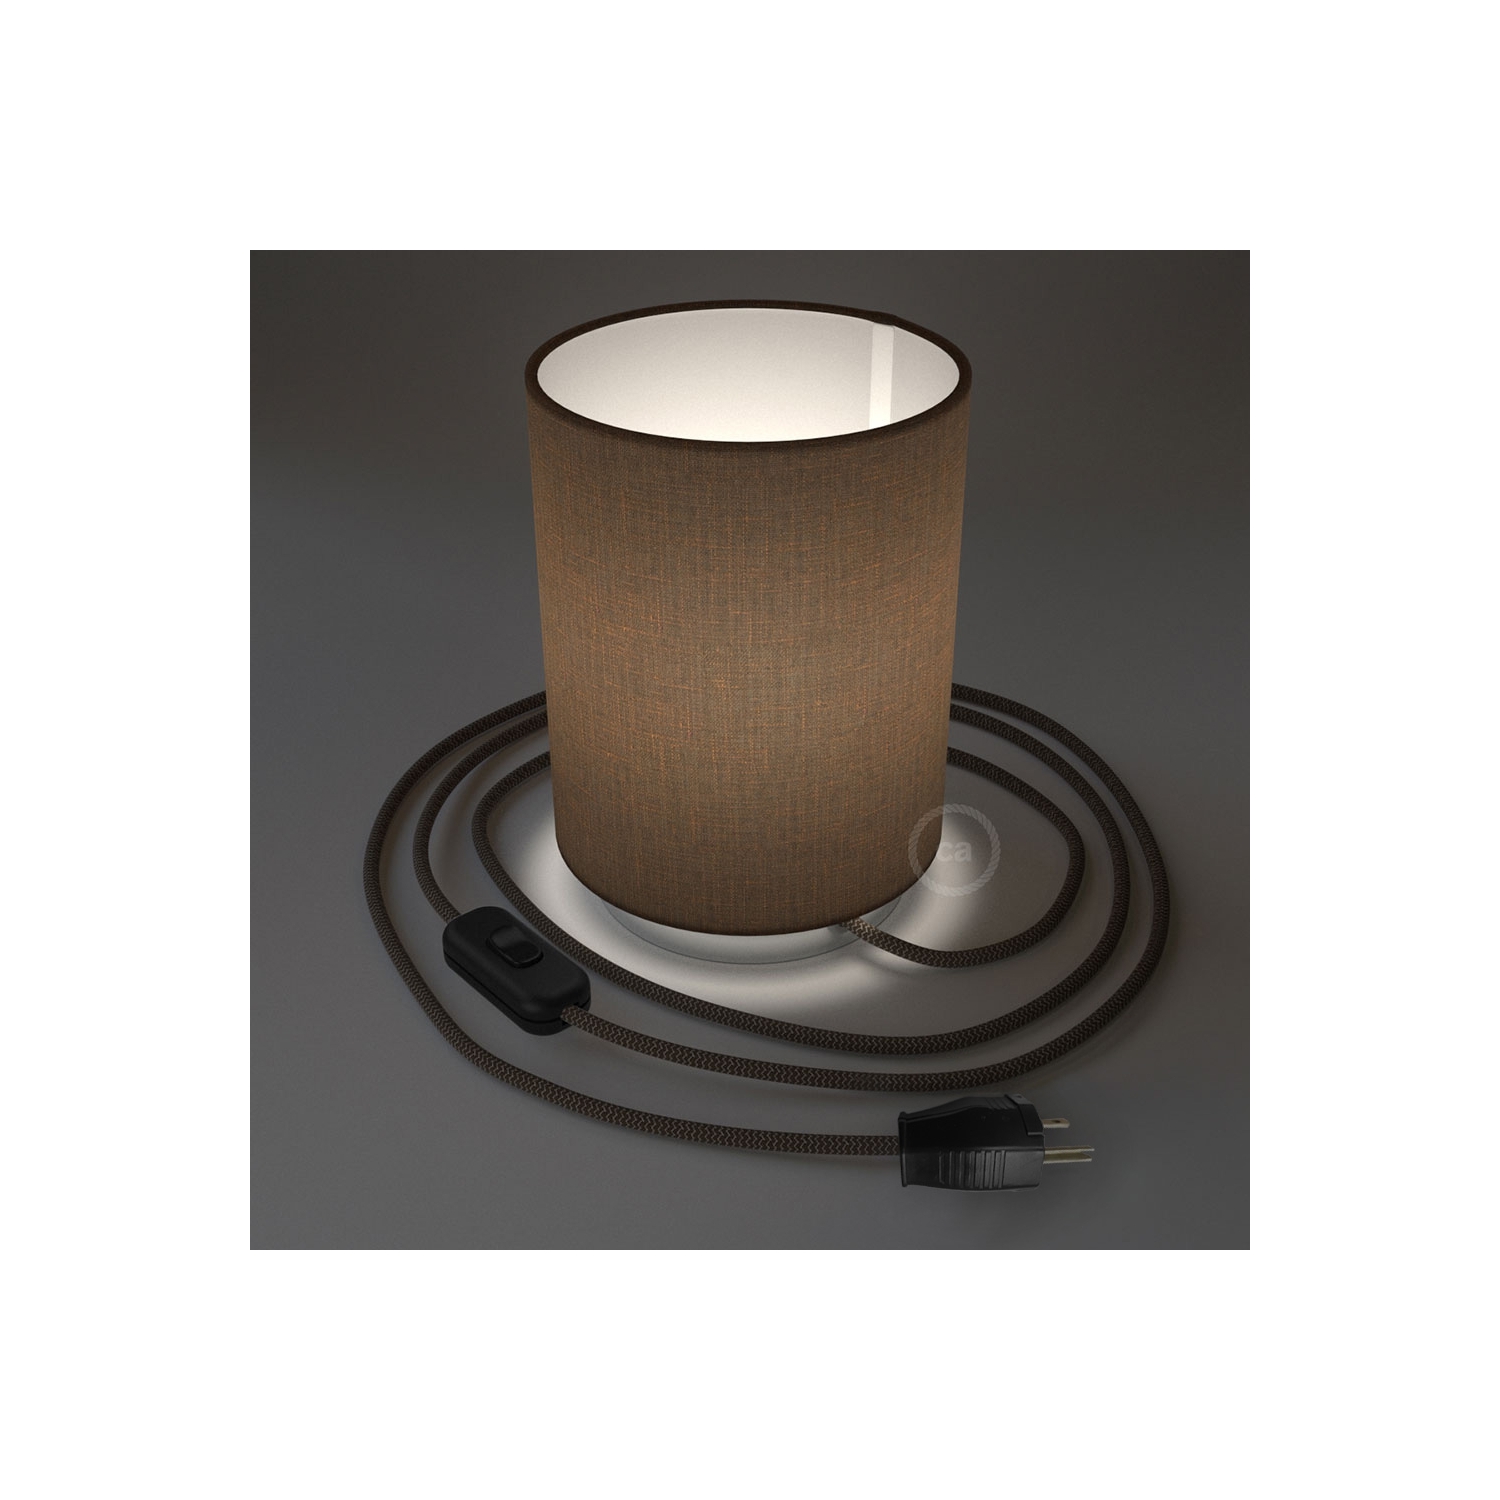 Posaluce with Brown Camelot Cylinder lampshade, chrome metal, with textile cable, switch and plug